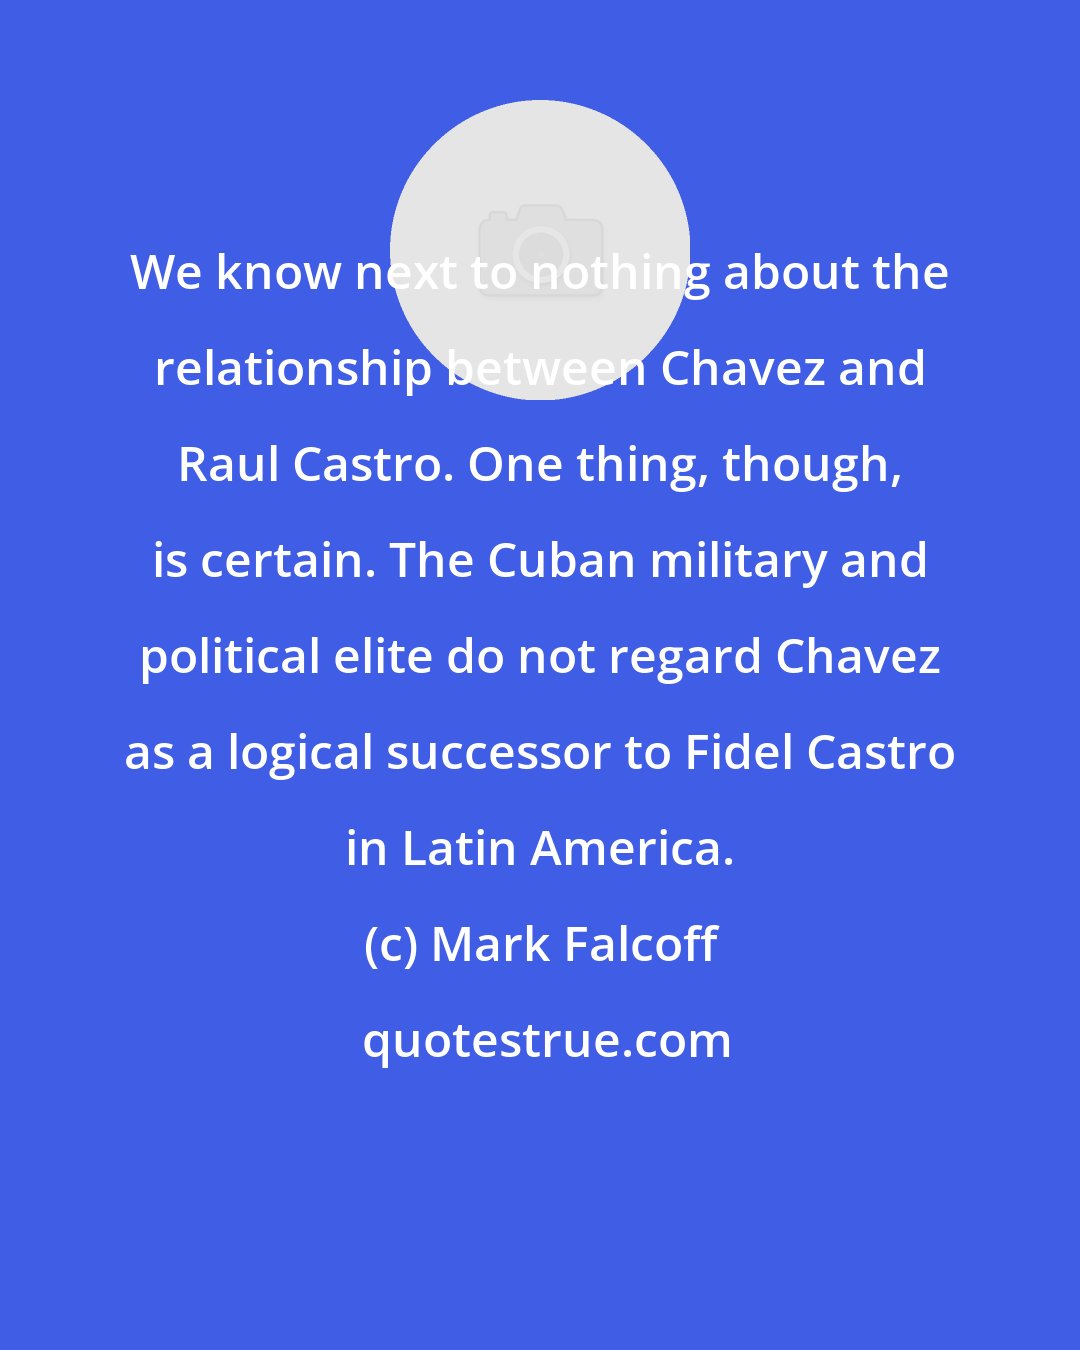 Mark Falcoff: We know next to nothing about the relationship between Chavez and Raul Castro. One thing, though, is certain. The Cuban military and political elite do not regard Chavez as a logical successor to Fidel Castro in Latin America.